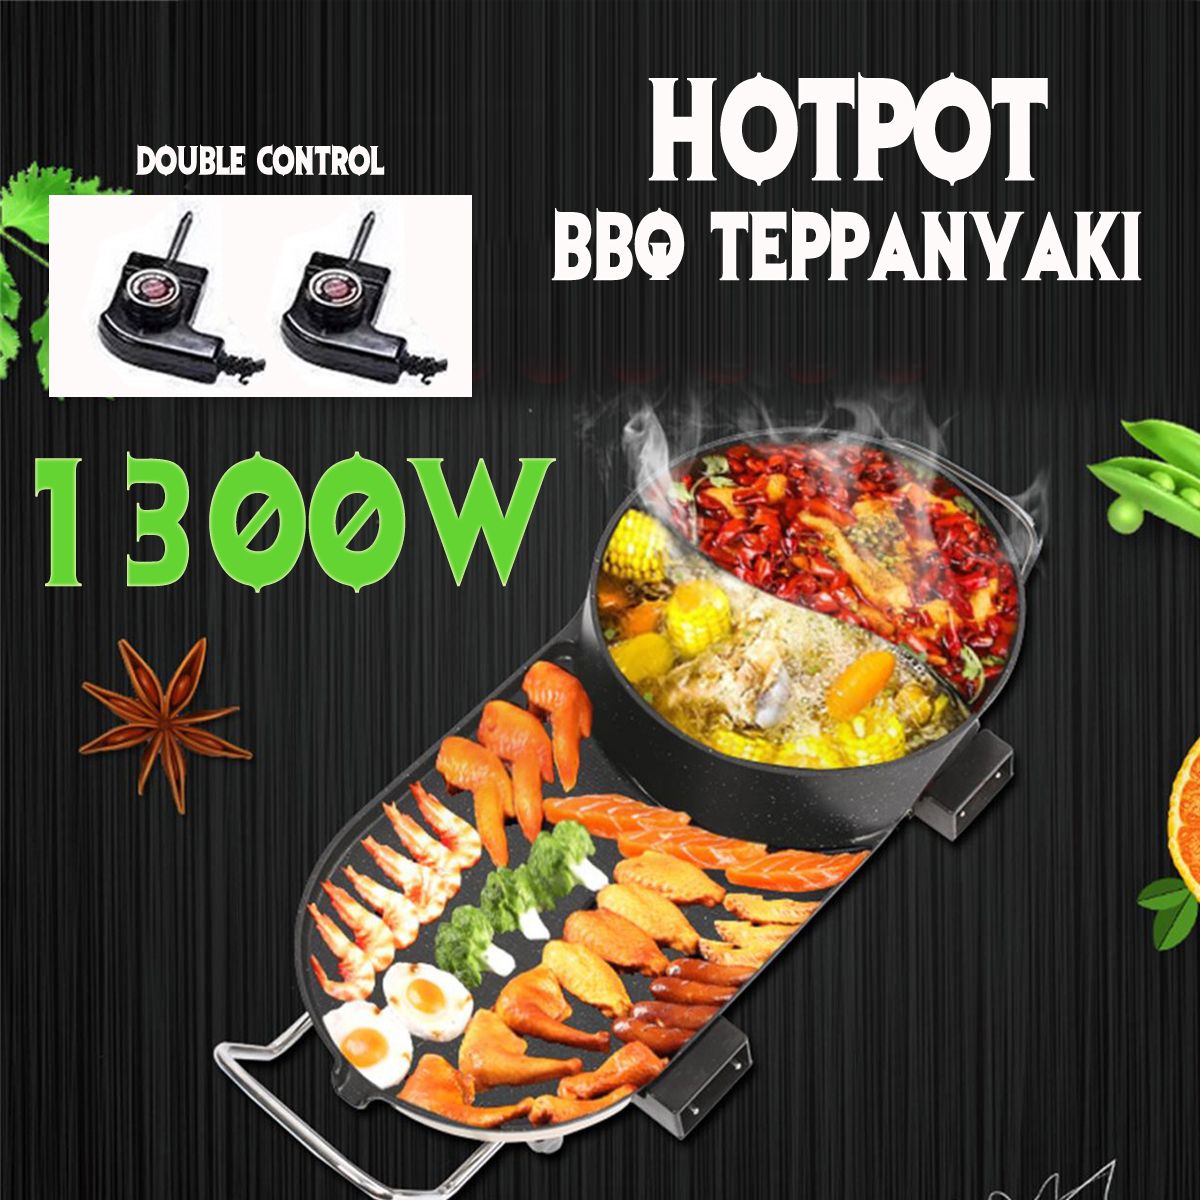 AU-Electric-Teppanyaki-Barbecue-BBQ-Grill-Hotpot-Table-Smokeless-Plate-1660332